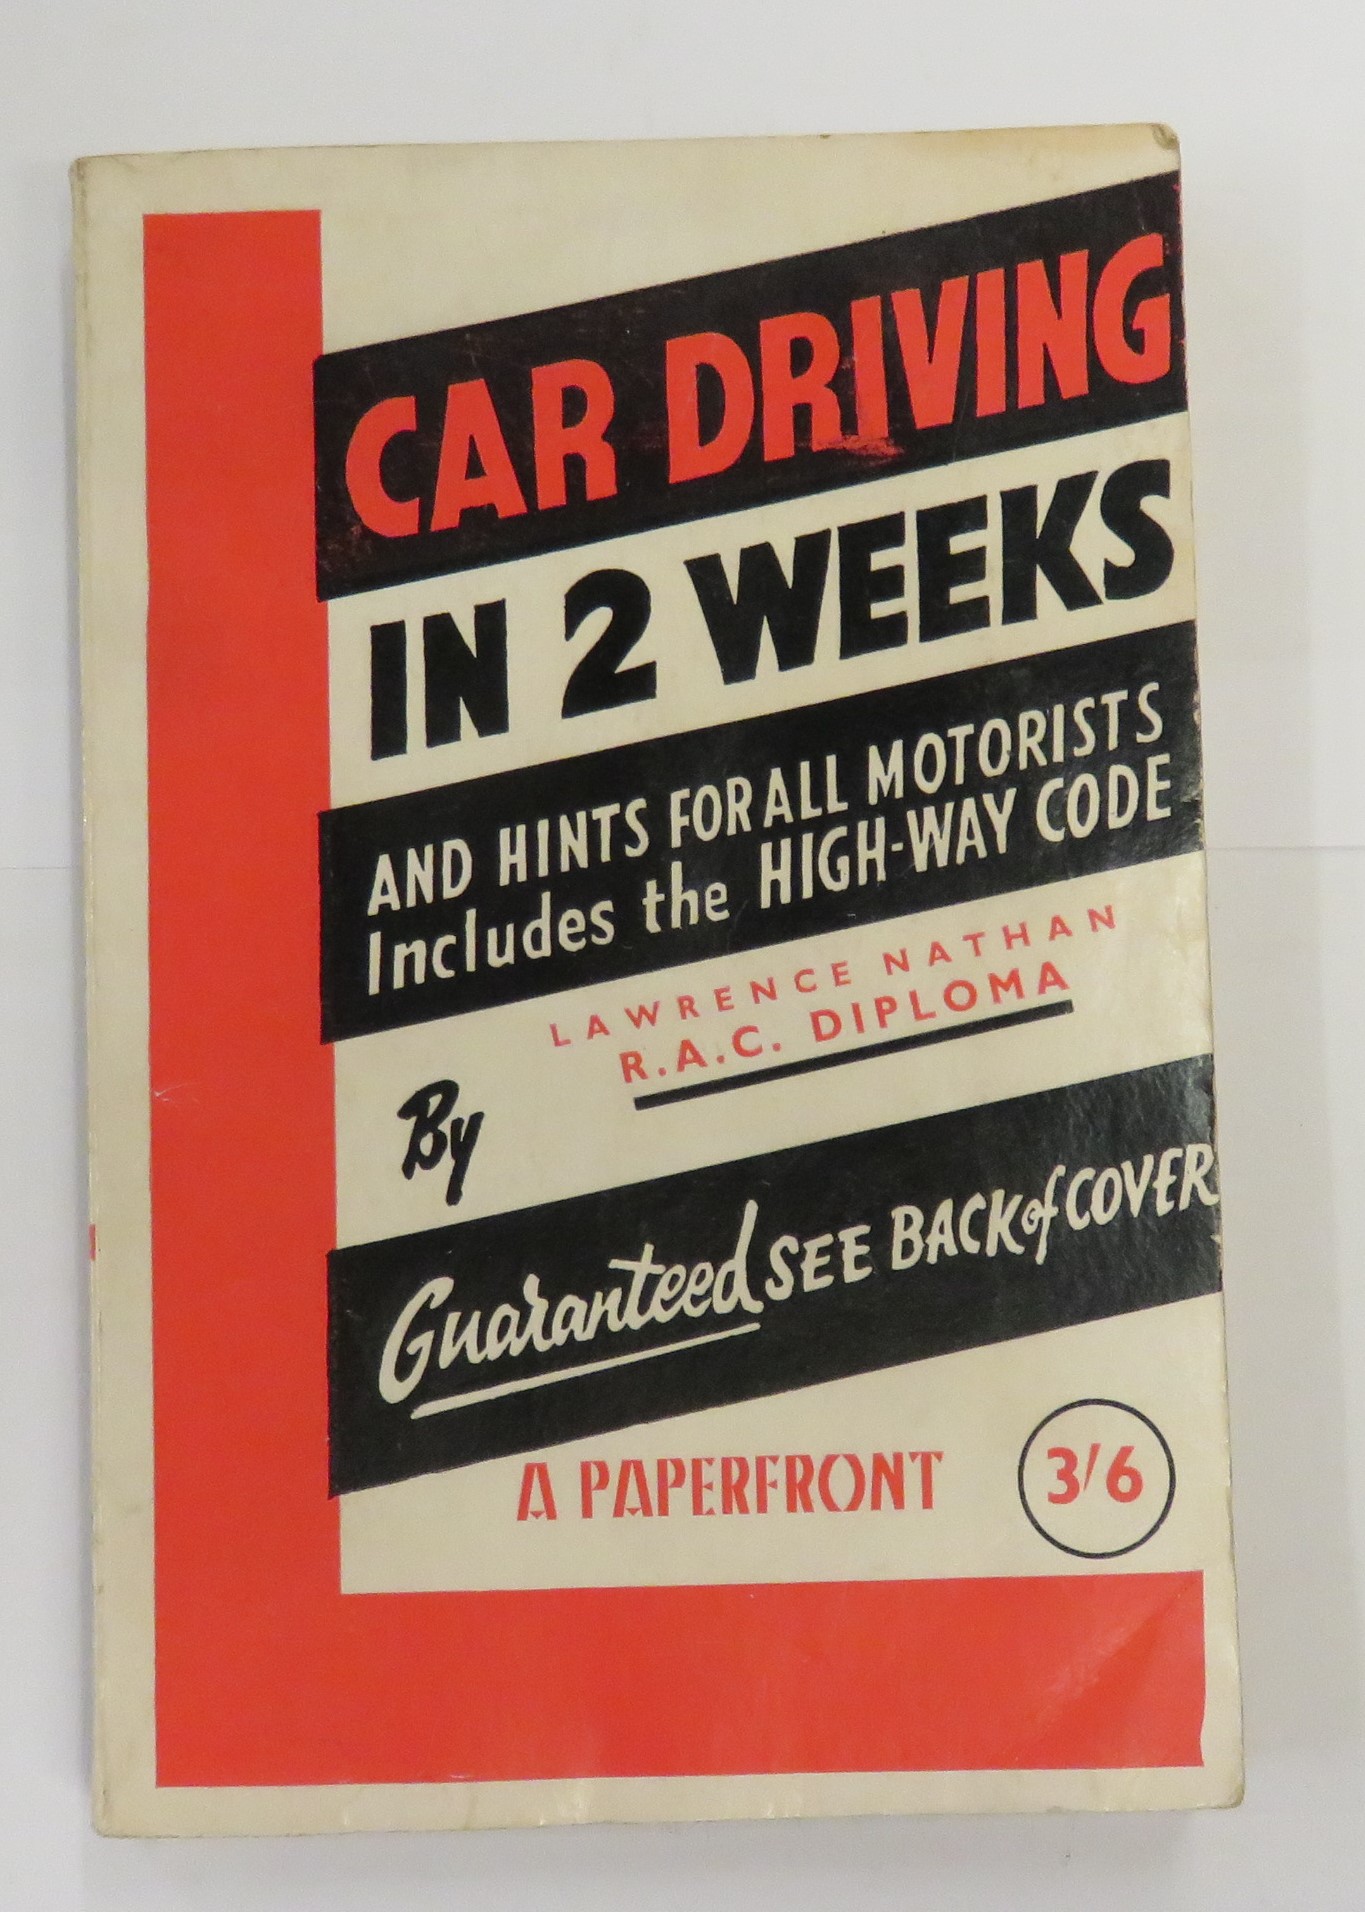 Car Driving In 2 Weeks And Hints For All Motorists Includes the High Way Code 